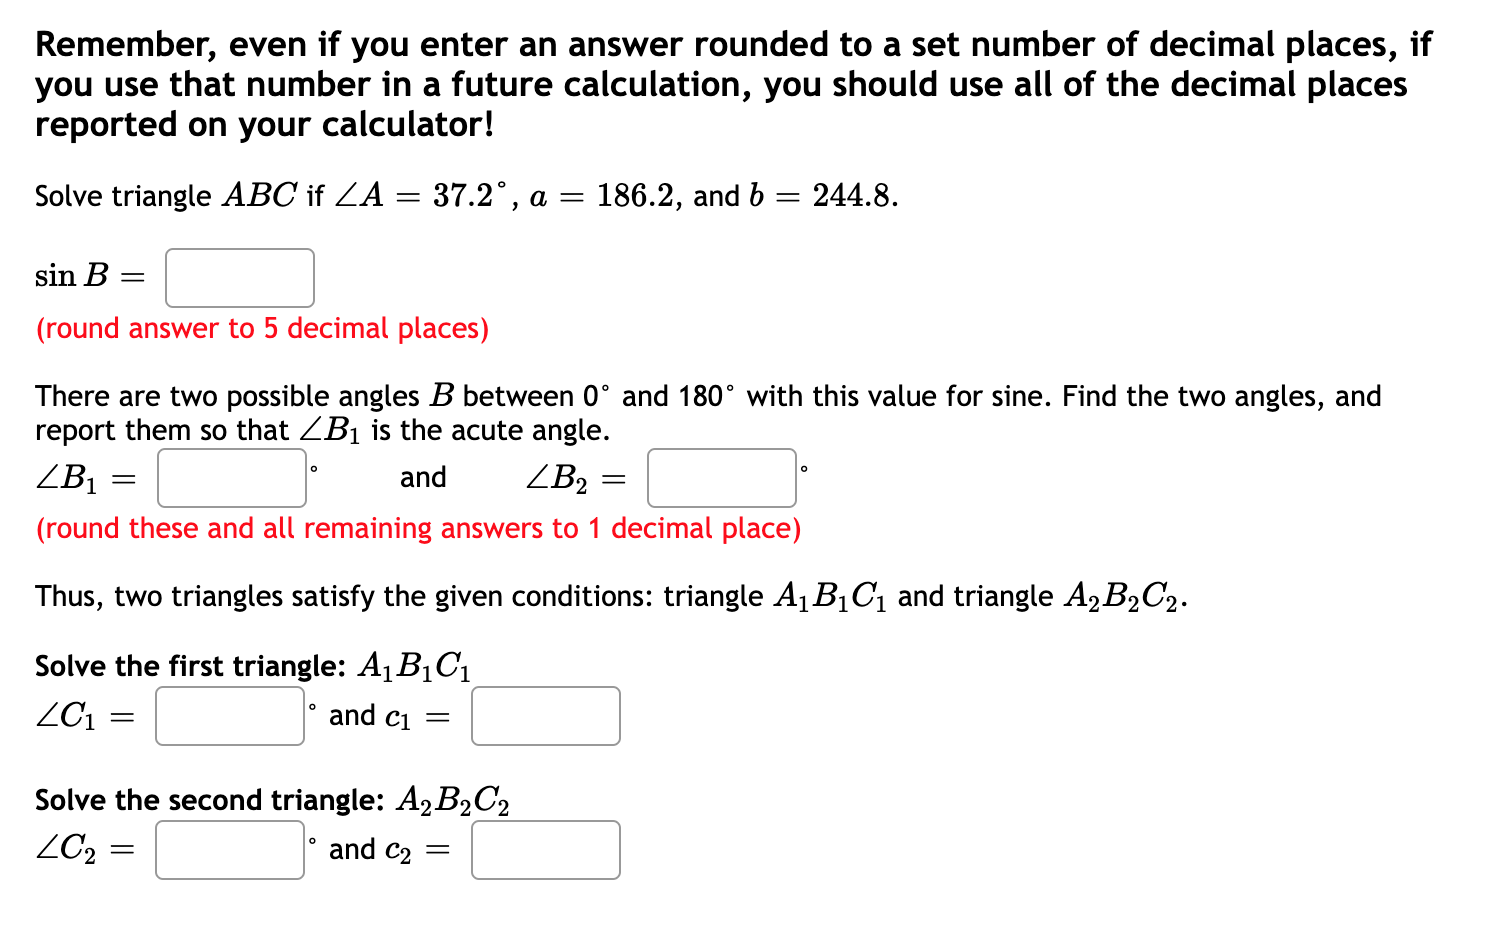 solved-remember-even-if-you-enter-an-answer-rounded-to-a-chegg